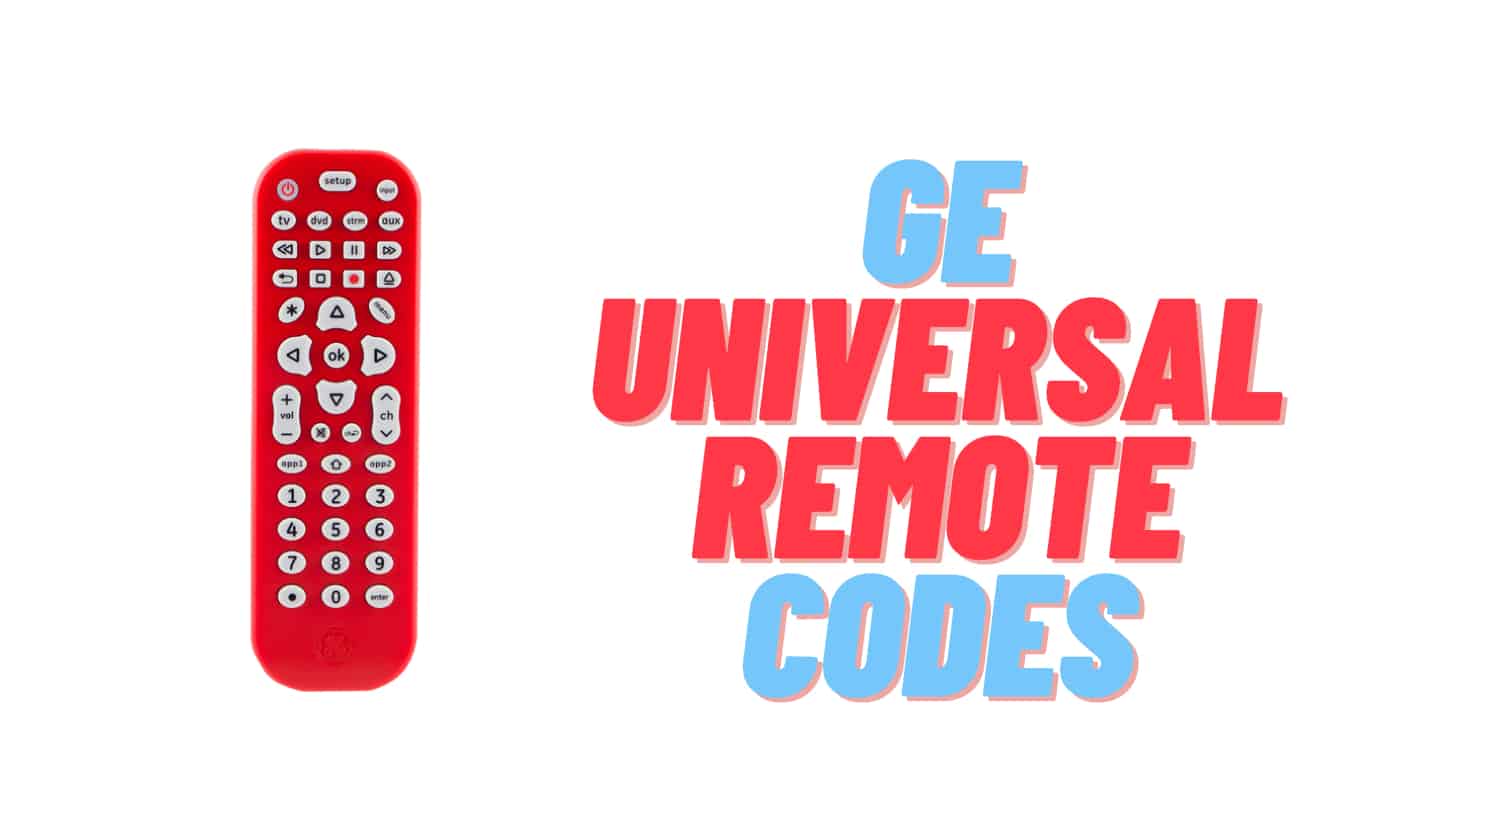 GE Universal Remote Codes for DVD Player